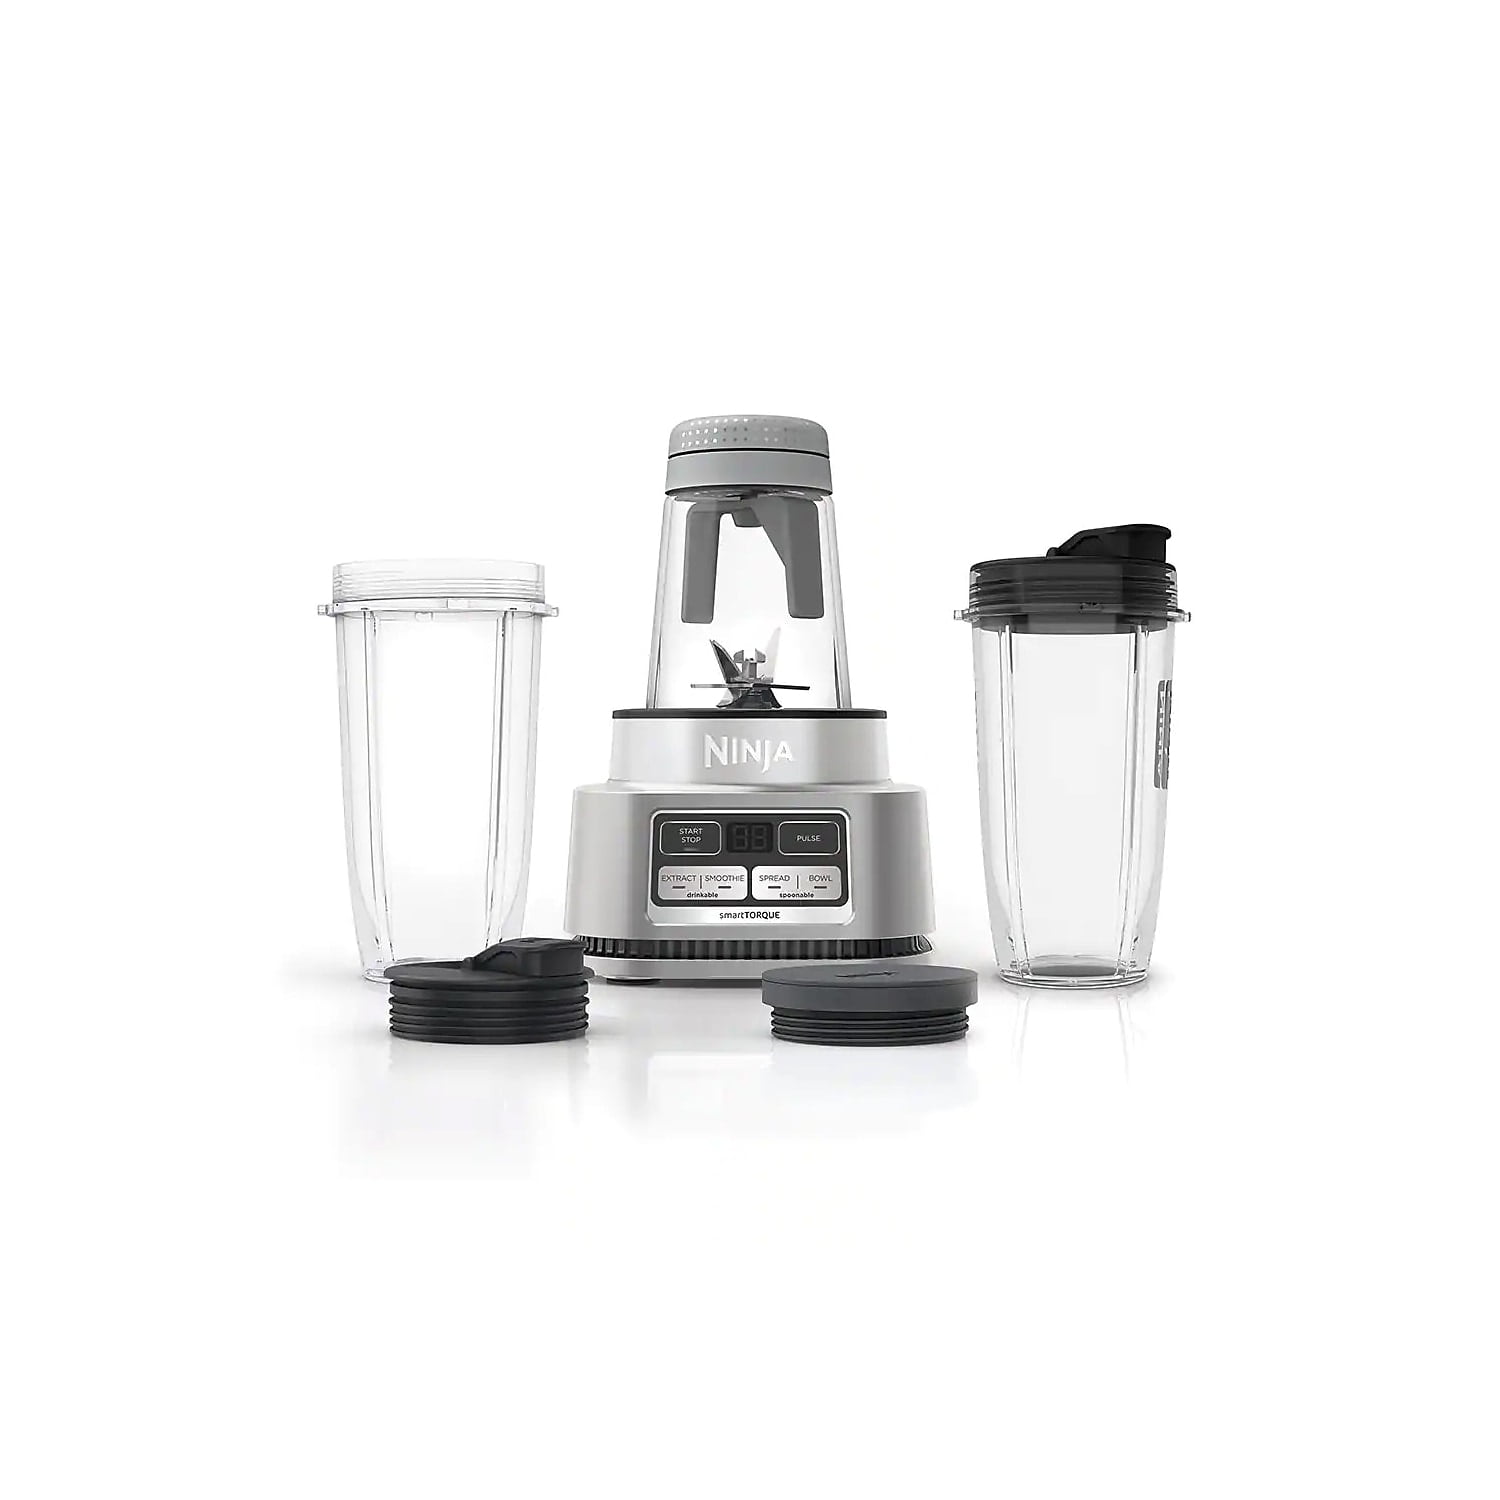 Ninja Shark issues 'instructional recall' for blade issues with blenders